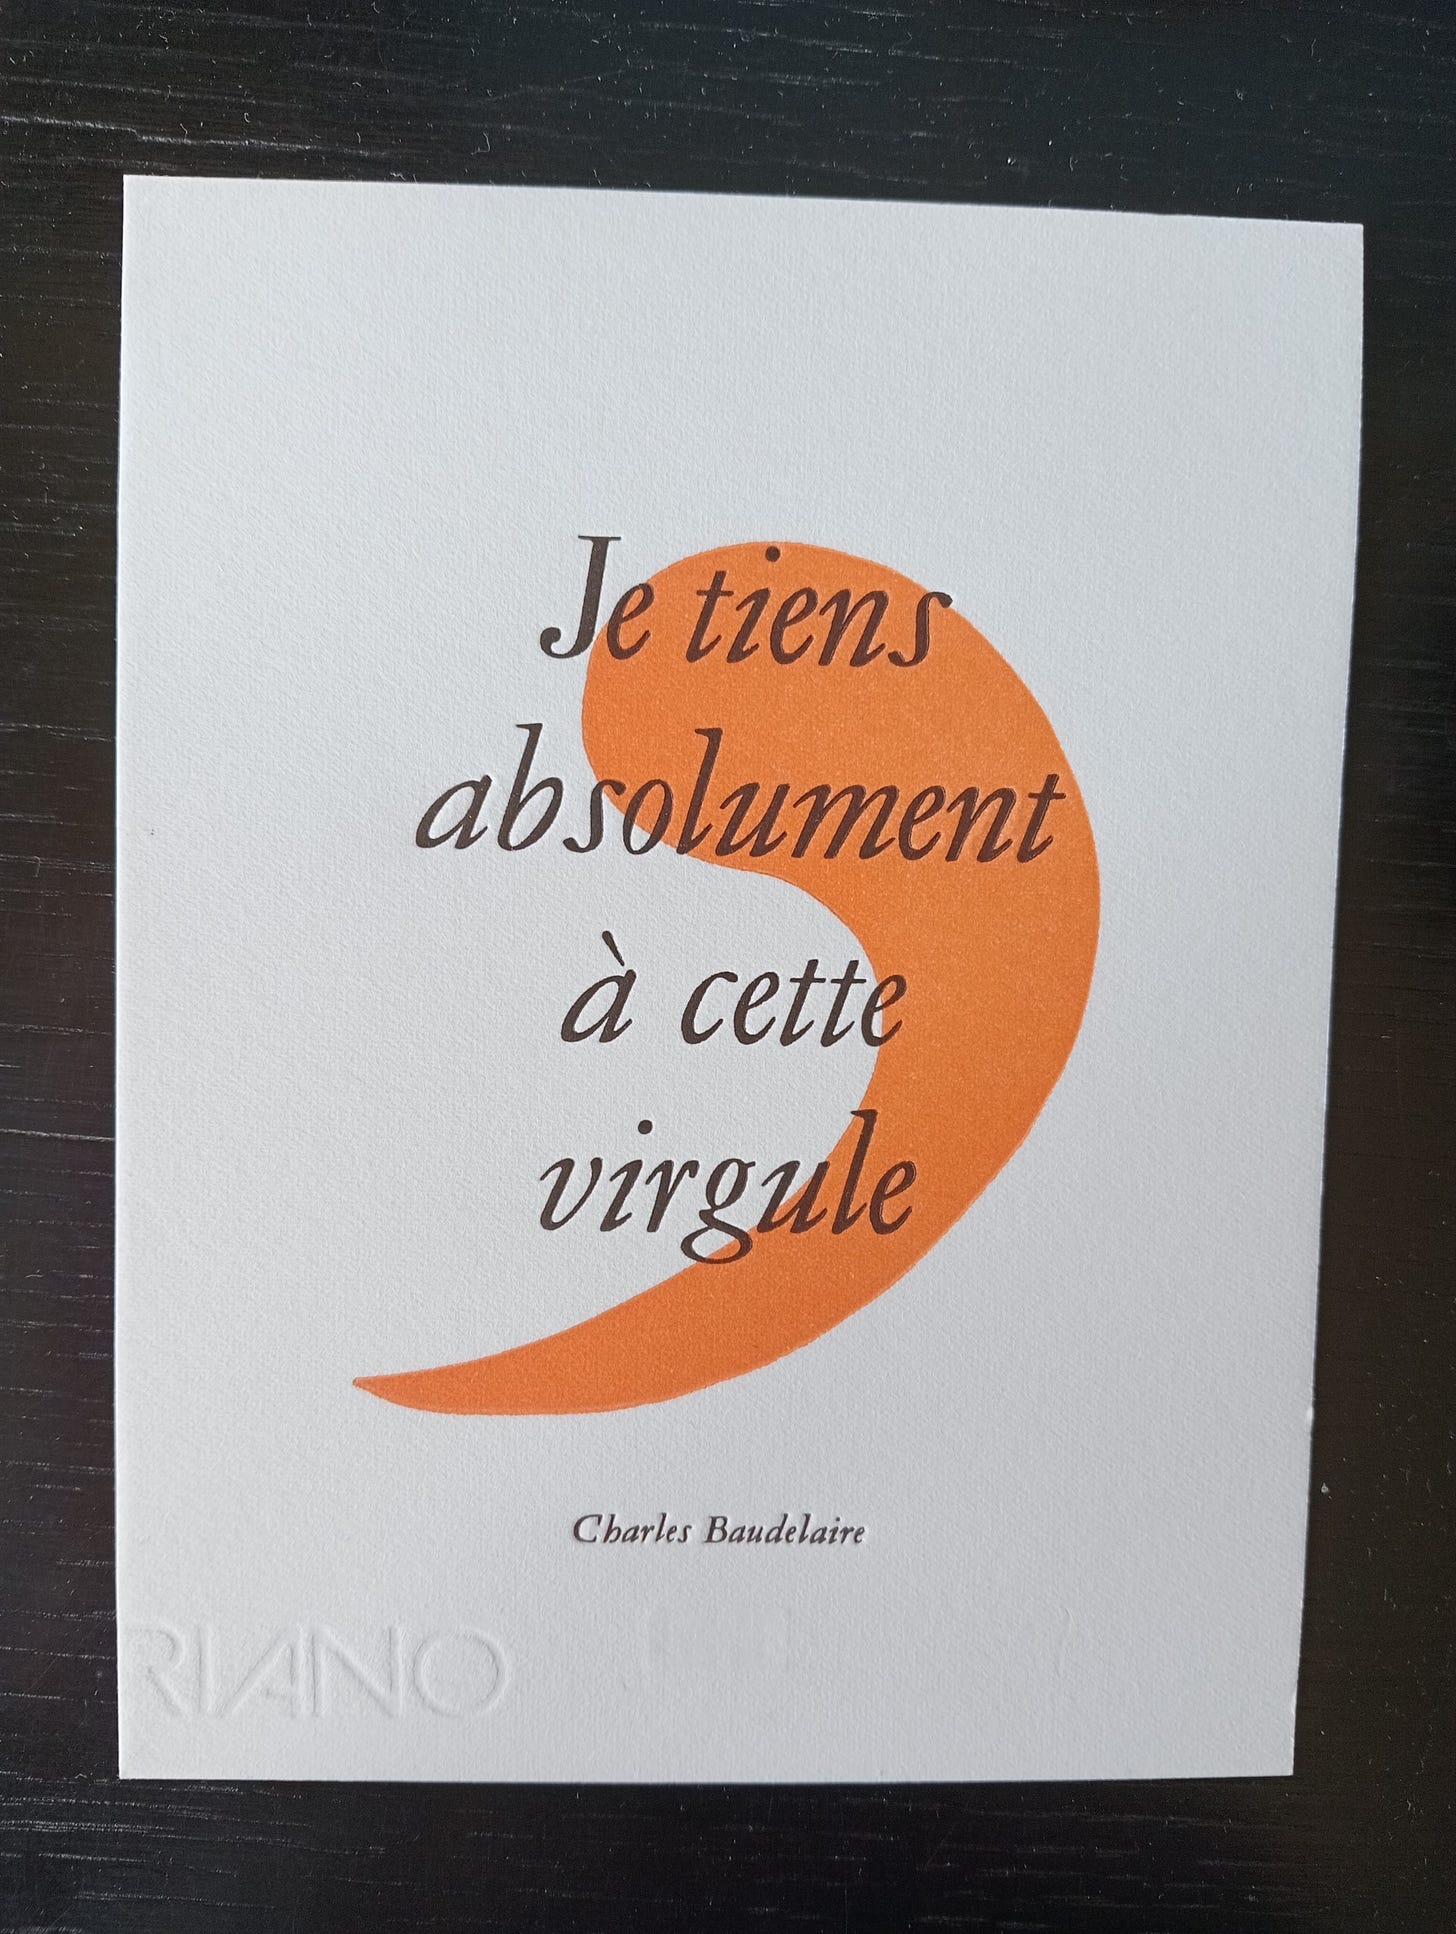 White postcard with large orange comma overlaid with the words "Je tiens absolument à cette virgule"